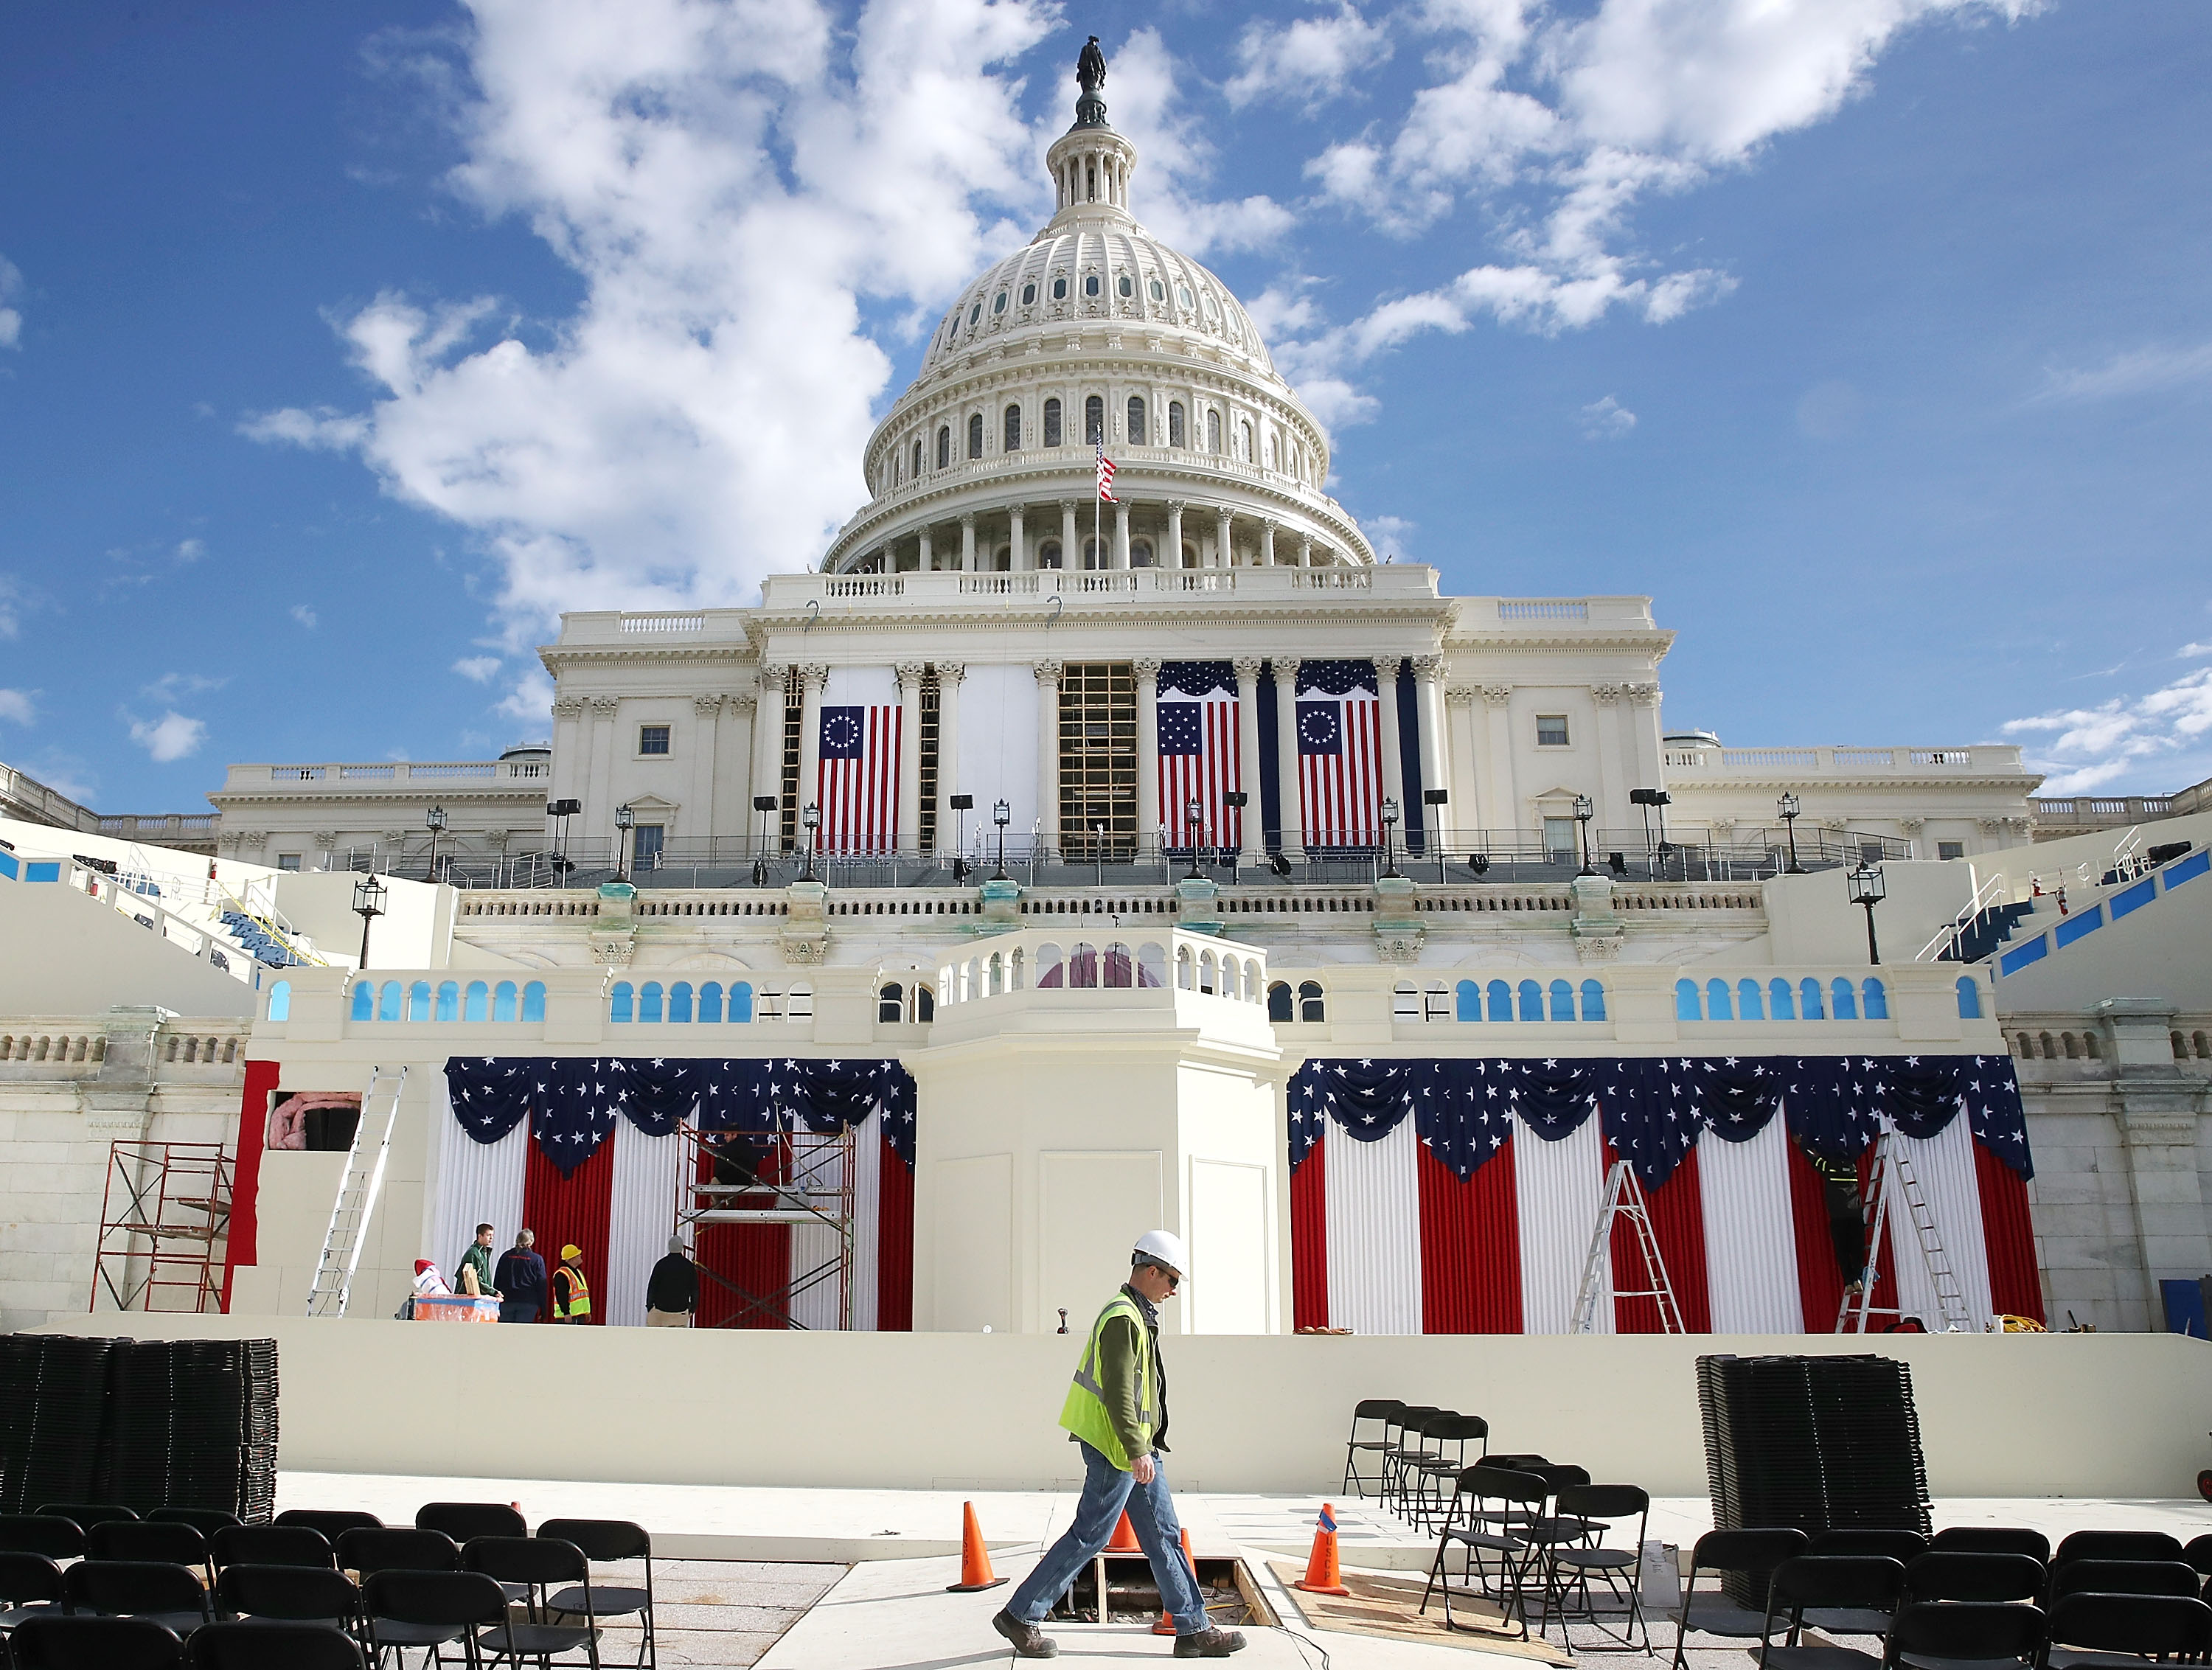 Work is still being performed on the stage ahead of next week inauguration at the U.S. Capitol, on Jan.13, 2017 in Washington, DC. (Mark Wilson—Getty Images)